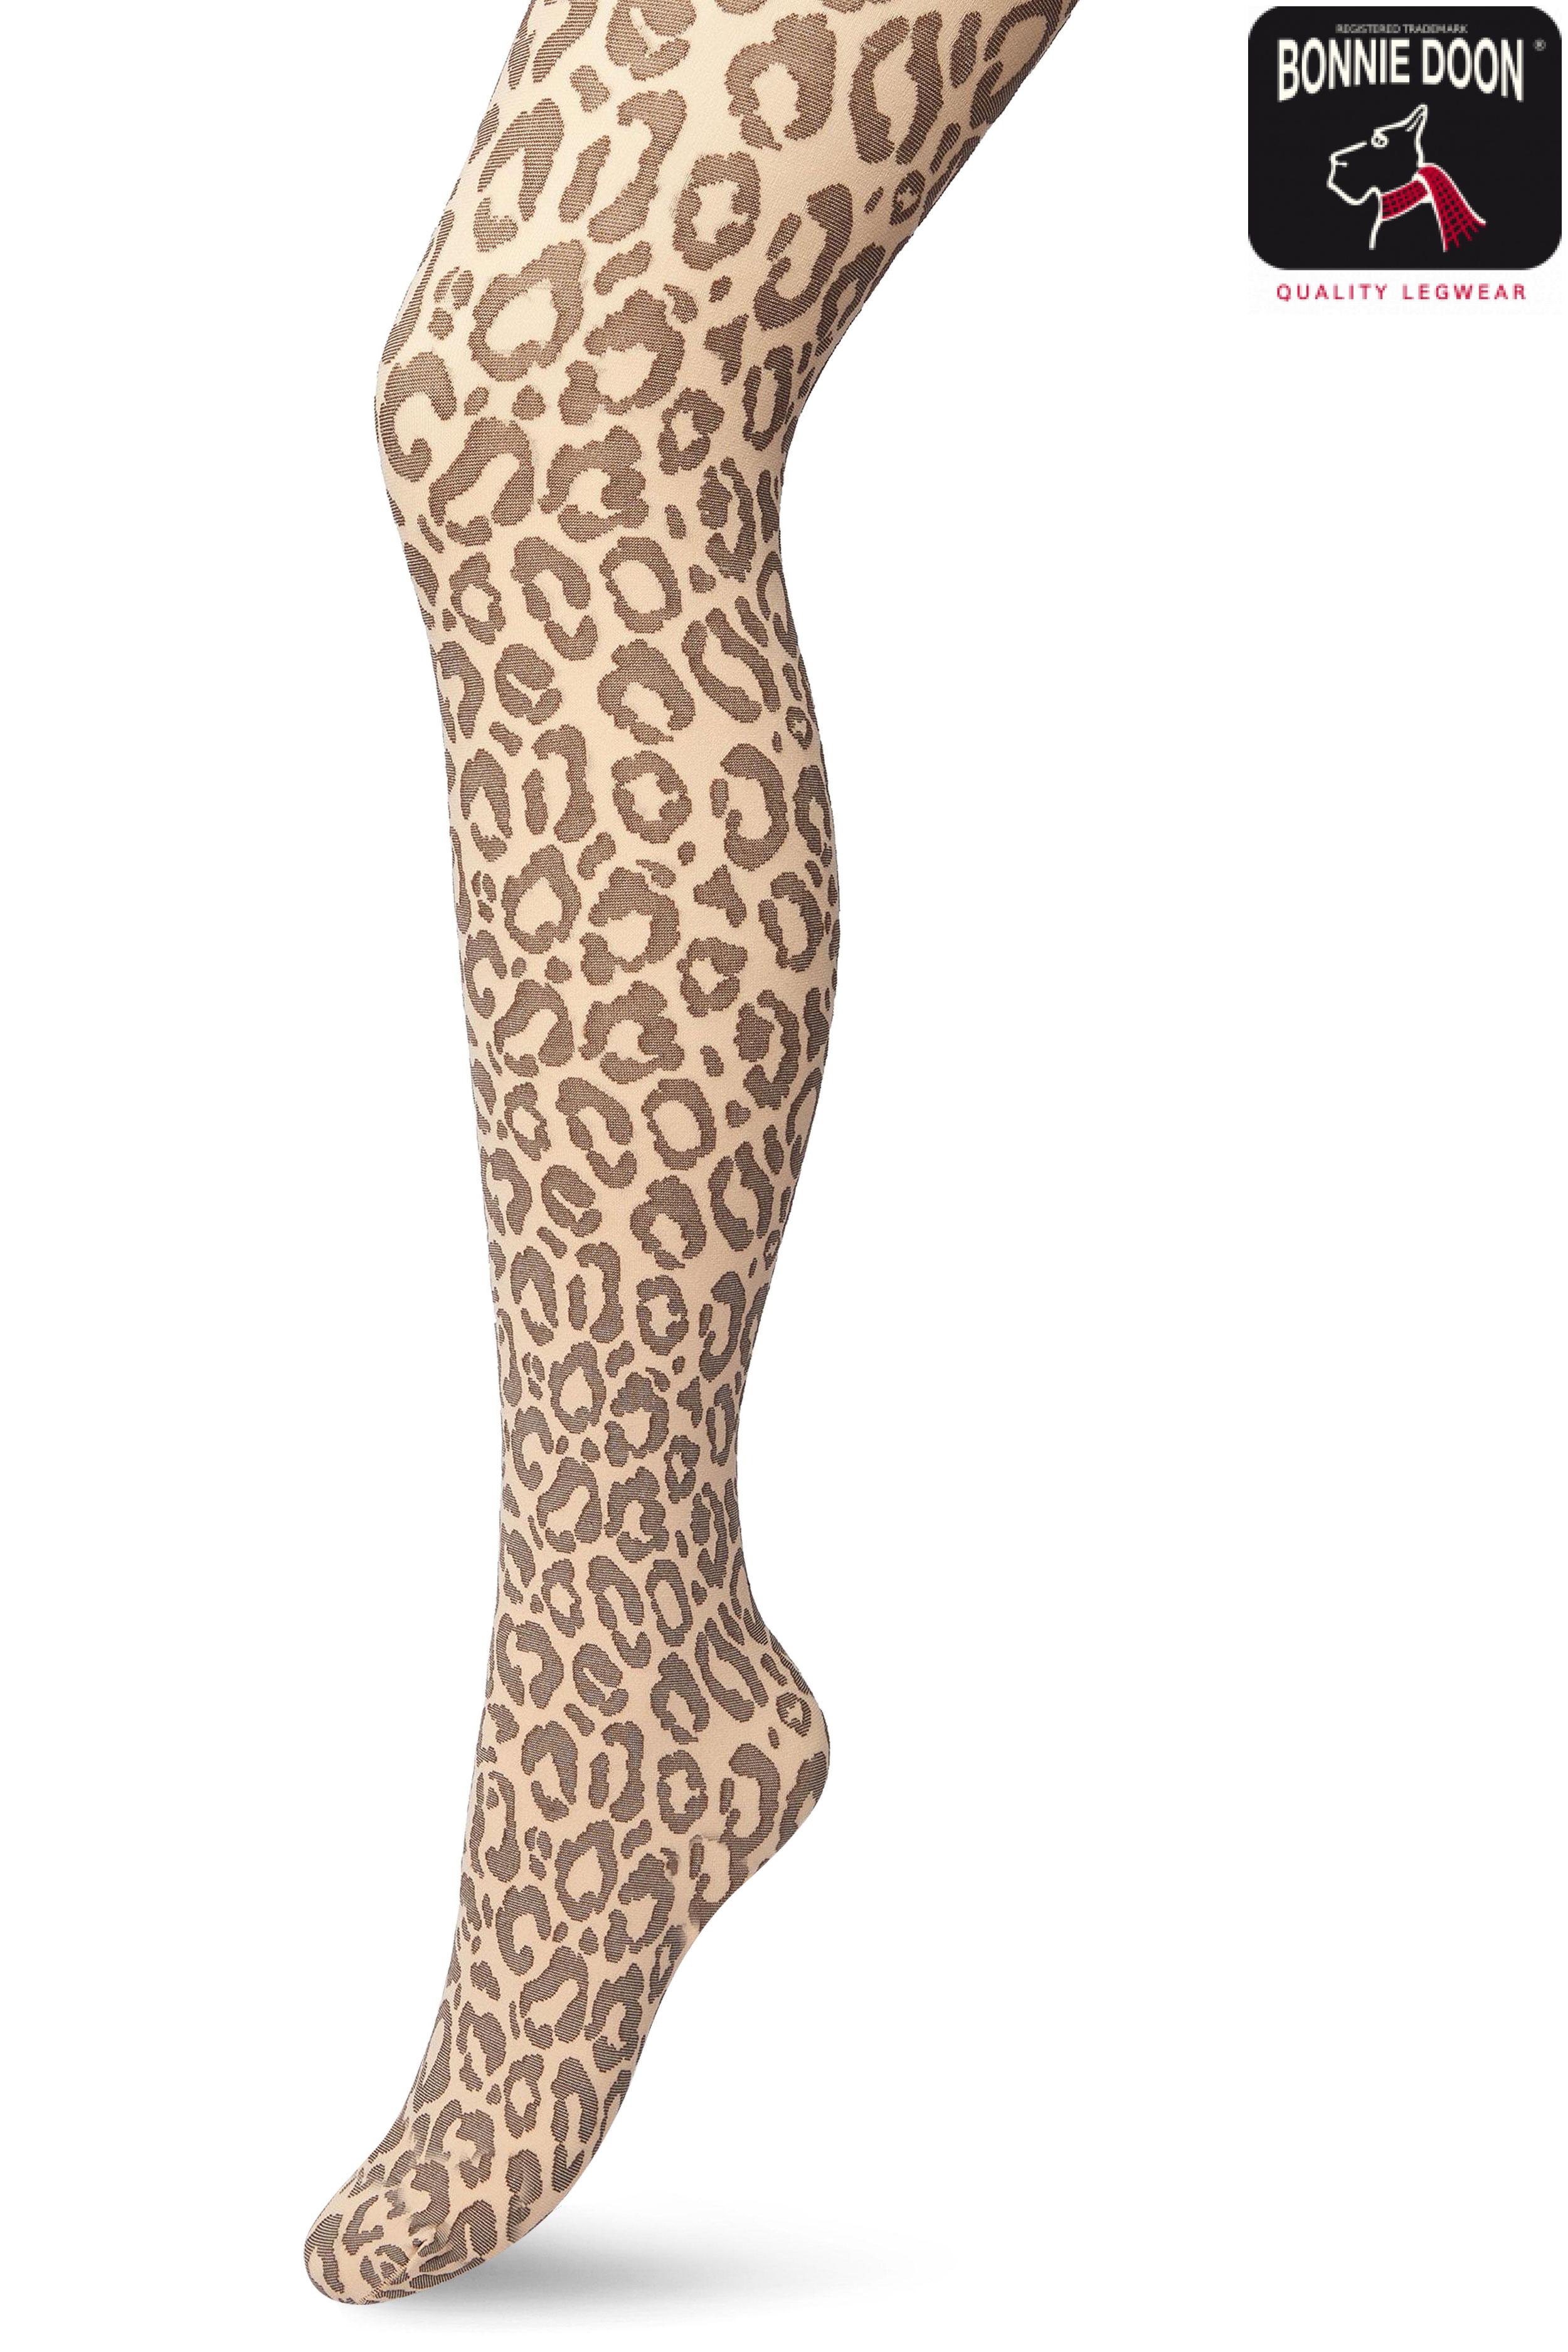 Panther Tights 100 denier Allmost apricot